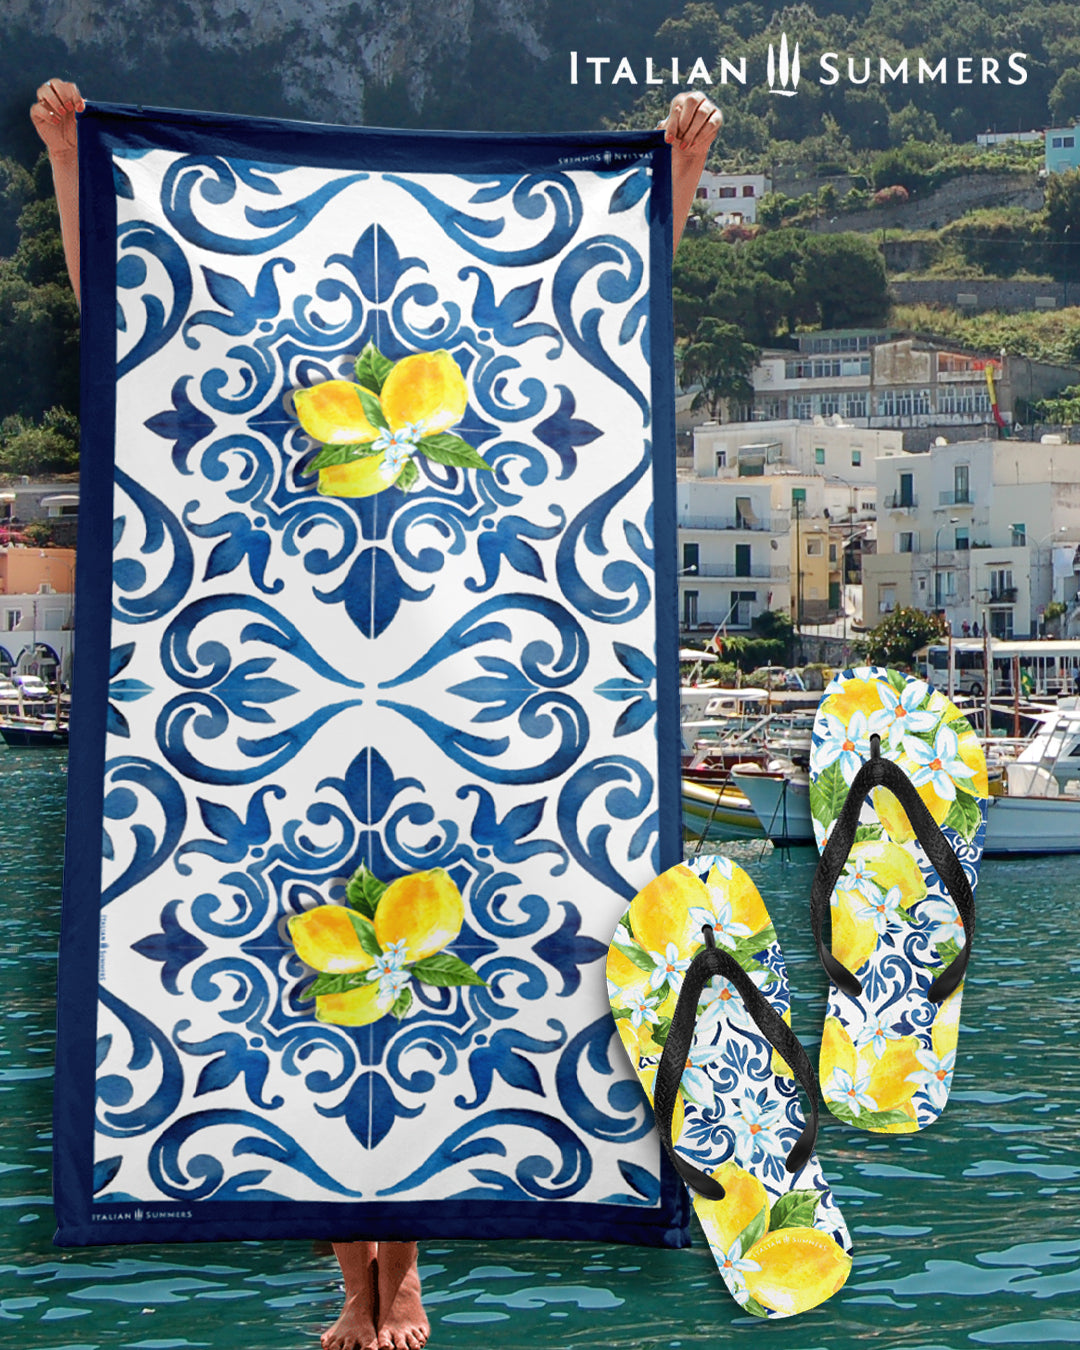 Italy flip flops with big beautiful Sorrento lemons full of white lemon blossems. From under the lemons you can see the blue vintage tiles coming true. This photo shows also one of our blue tiles and lemons beach towels. Made by Italian Summers